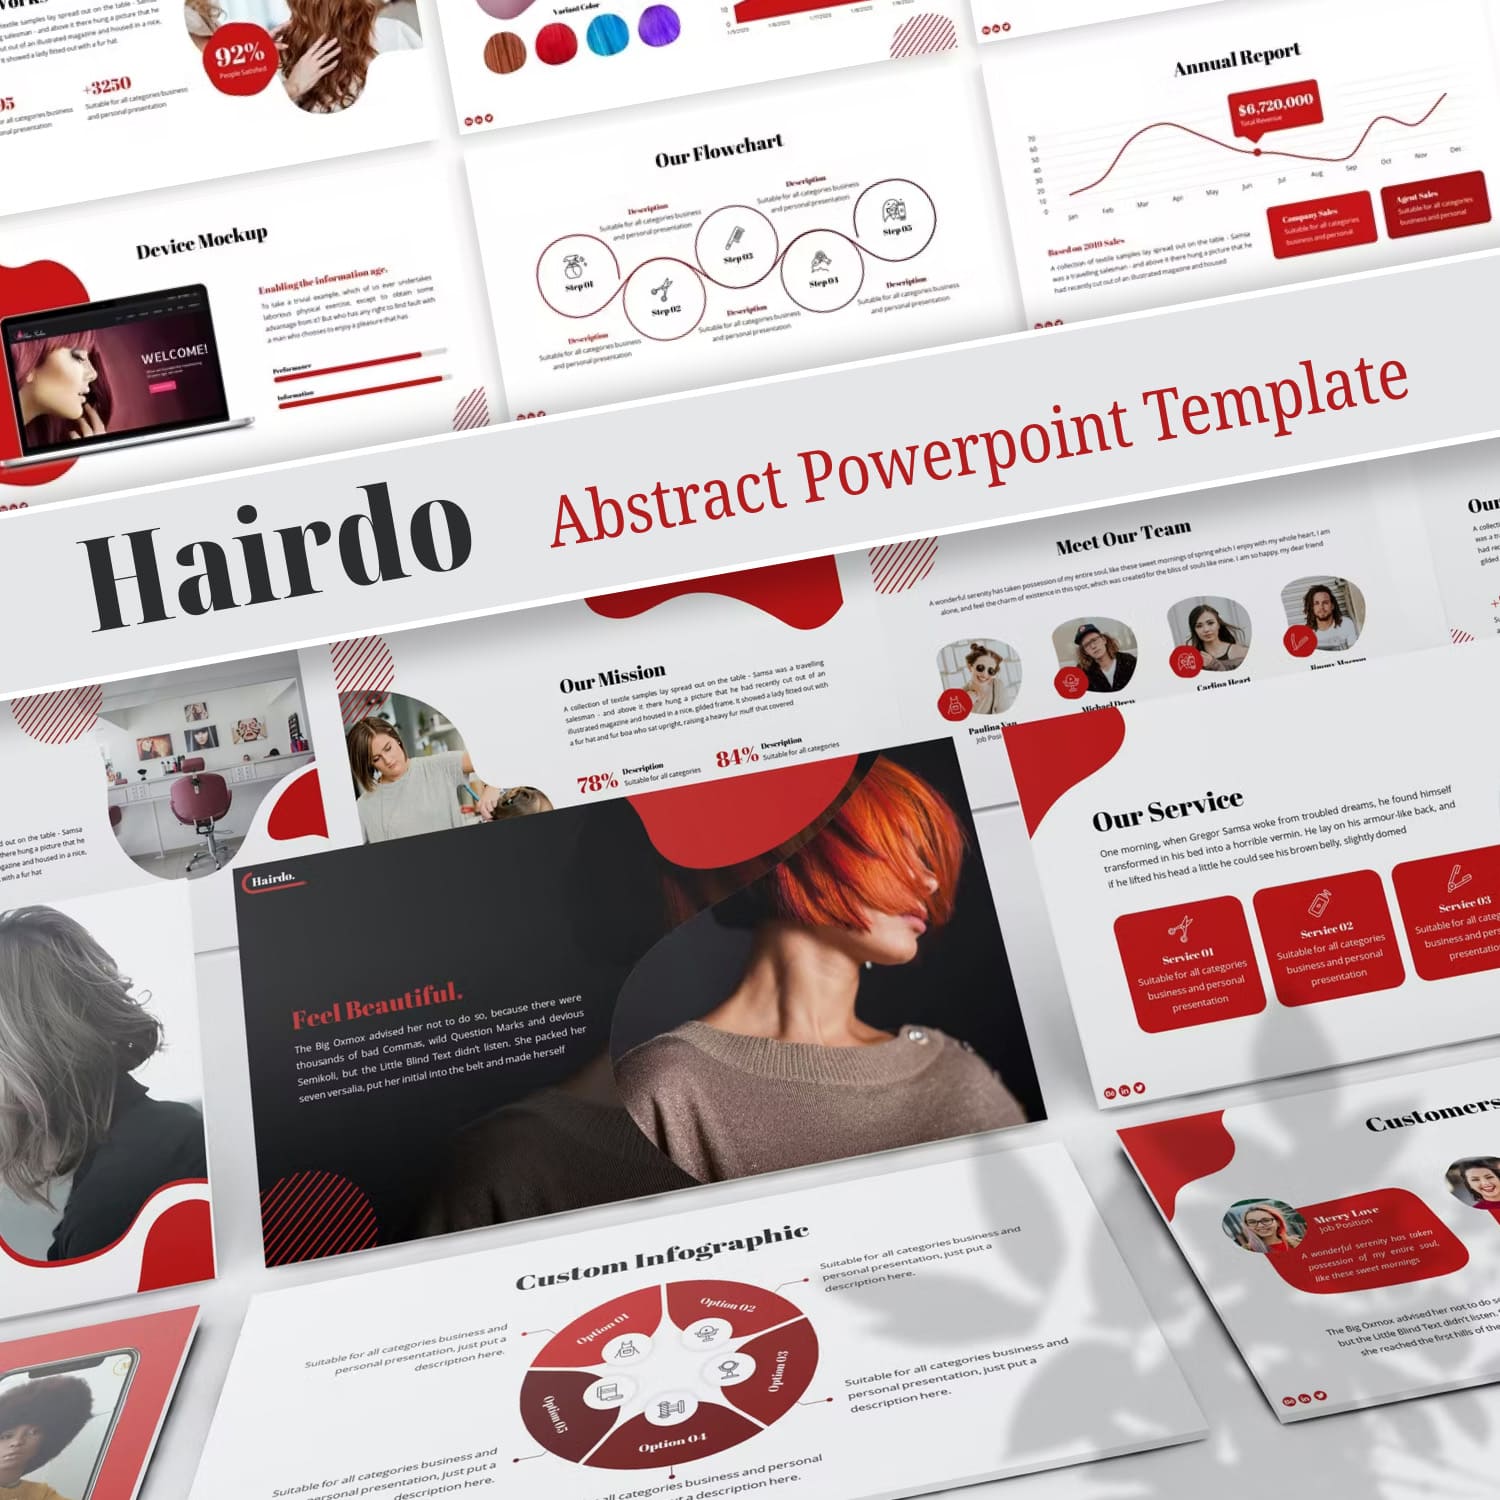 Hairdo abstract powerpoint template - main image preview.